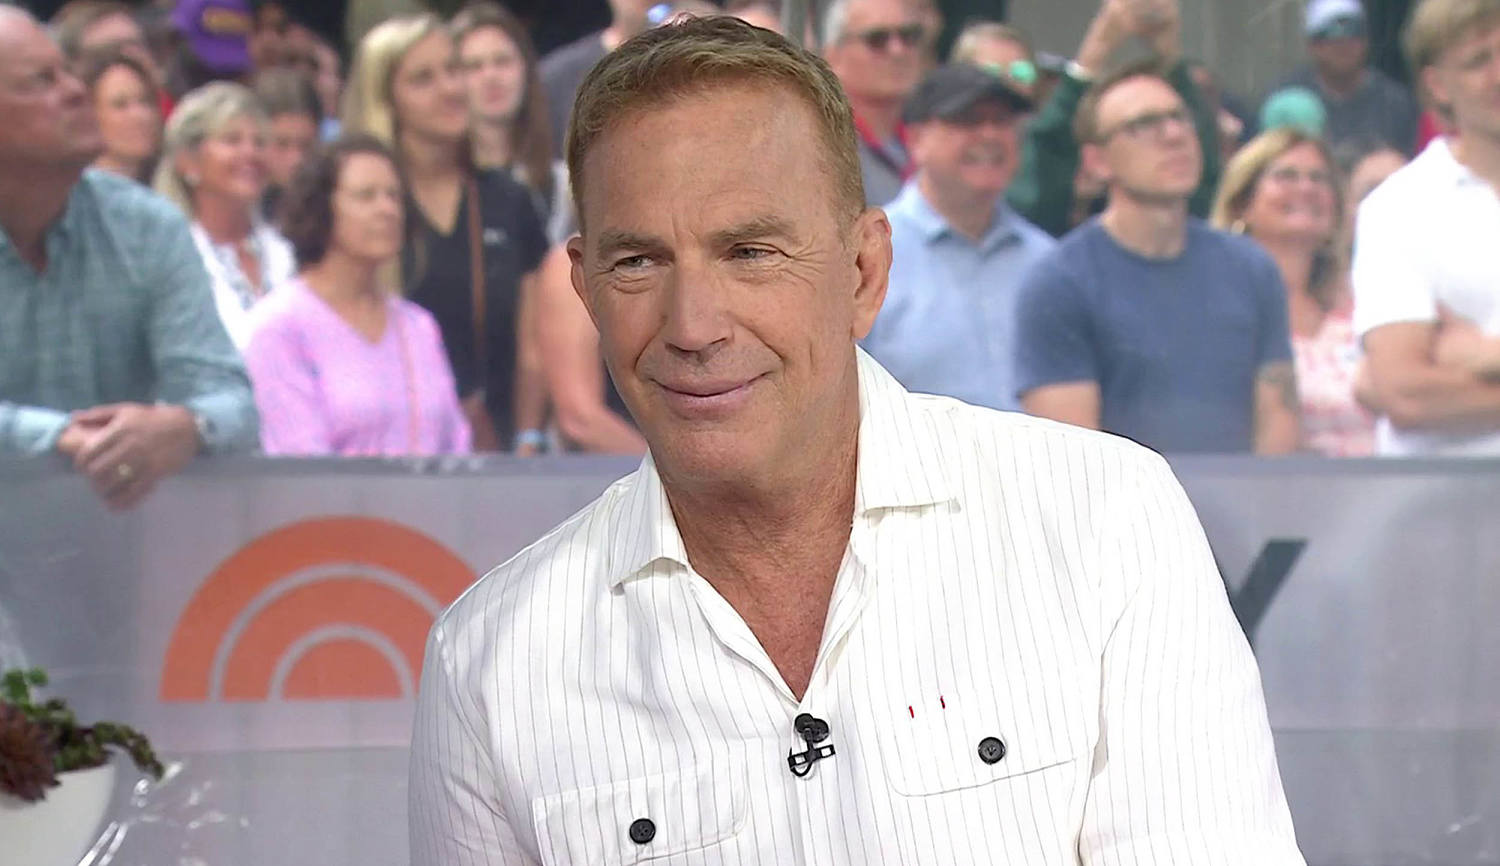 Kevin Costner says he’d return to ‘Yellowstone’ under ‘the right circumstances’ 